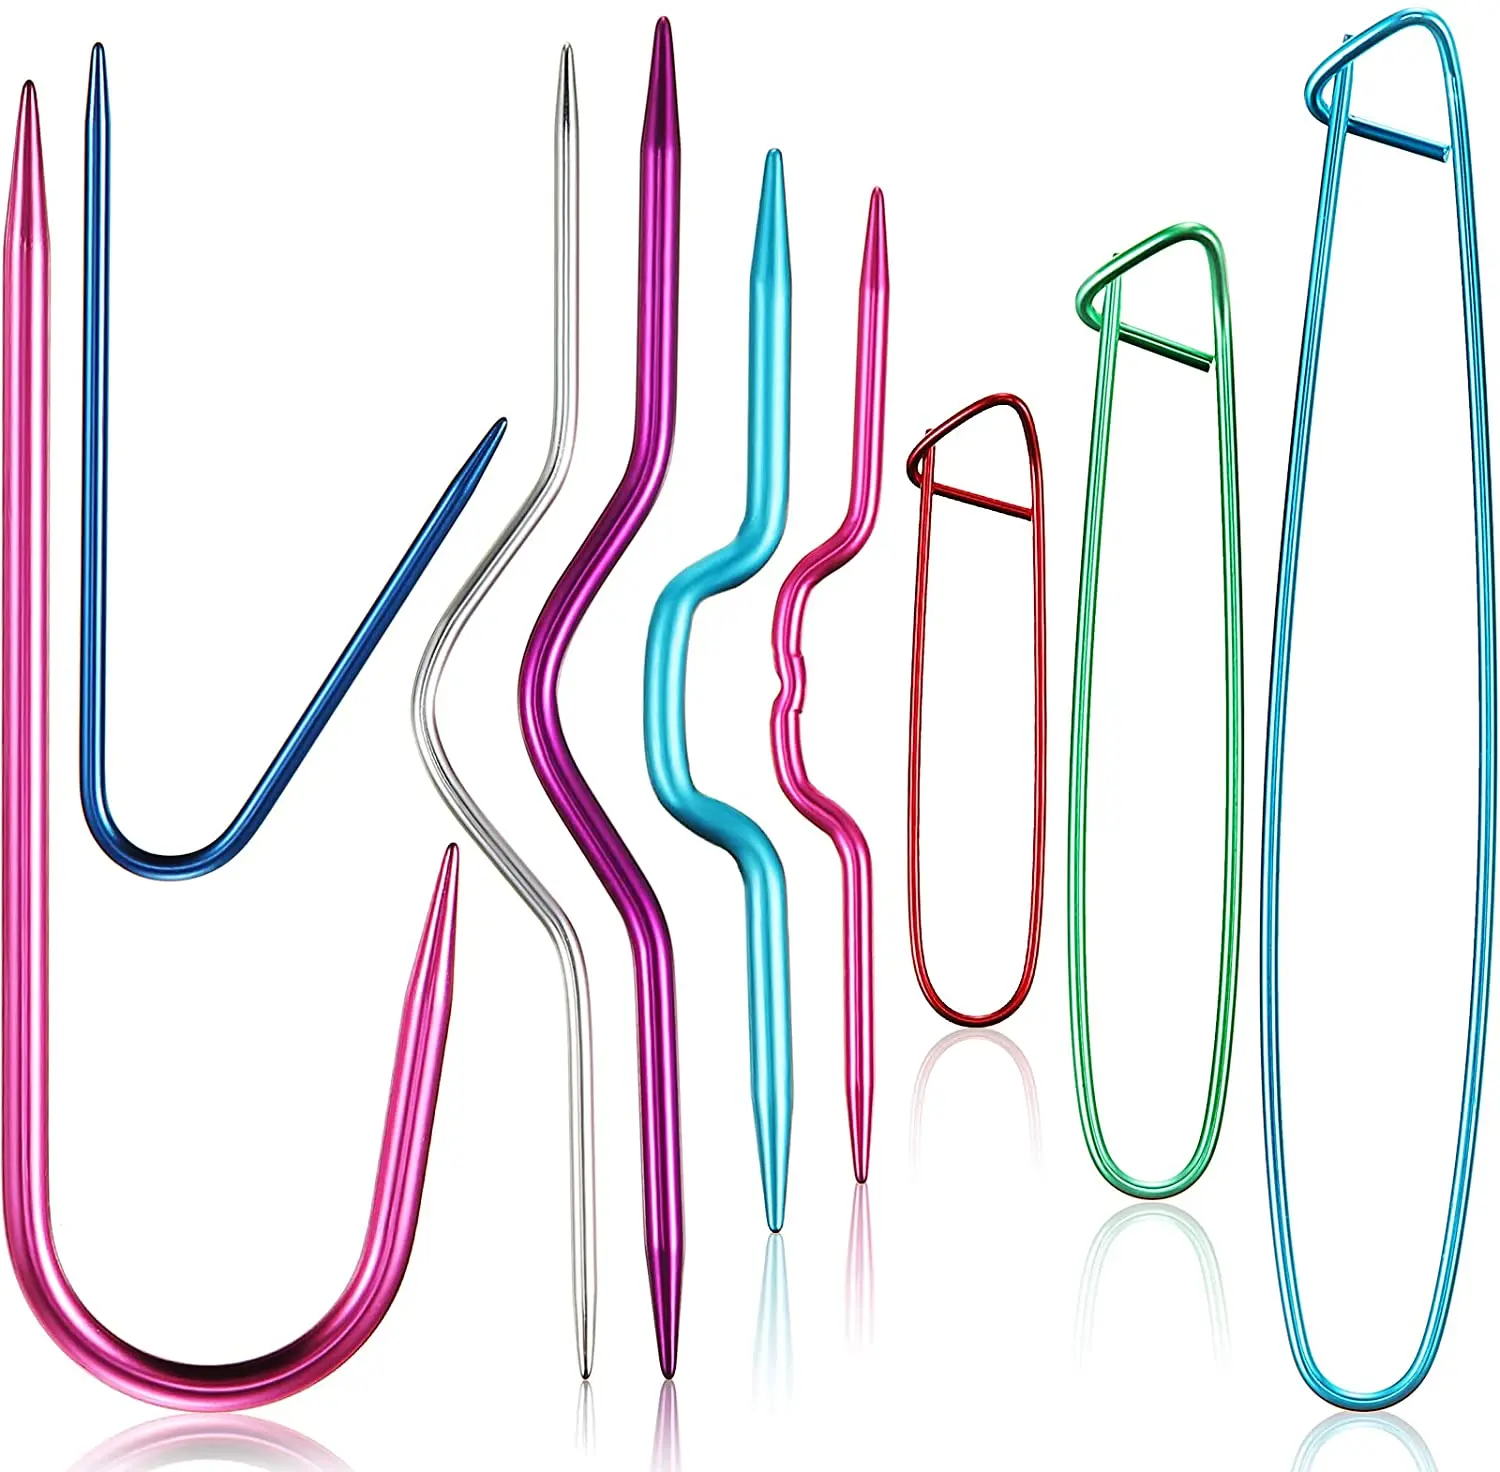 

9 Pieces Cable Stitch Holders, Mixed Color Aluminum Cable Needles Stitch Holders, Safety Pin Brooch Weaving Needle